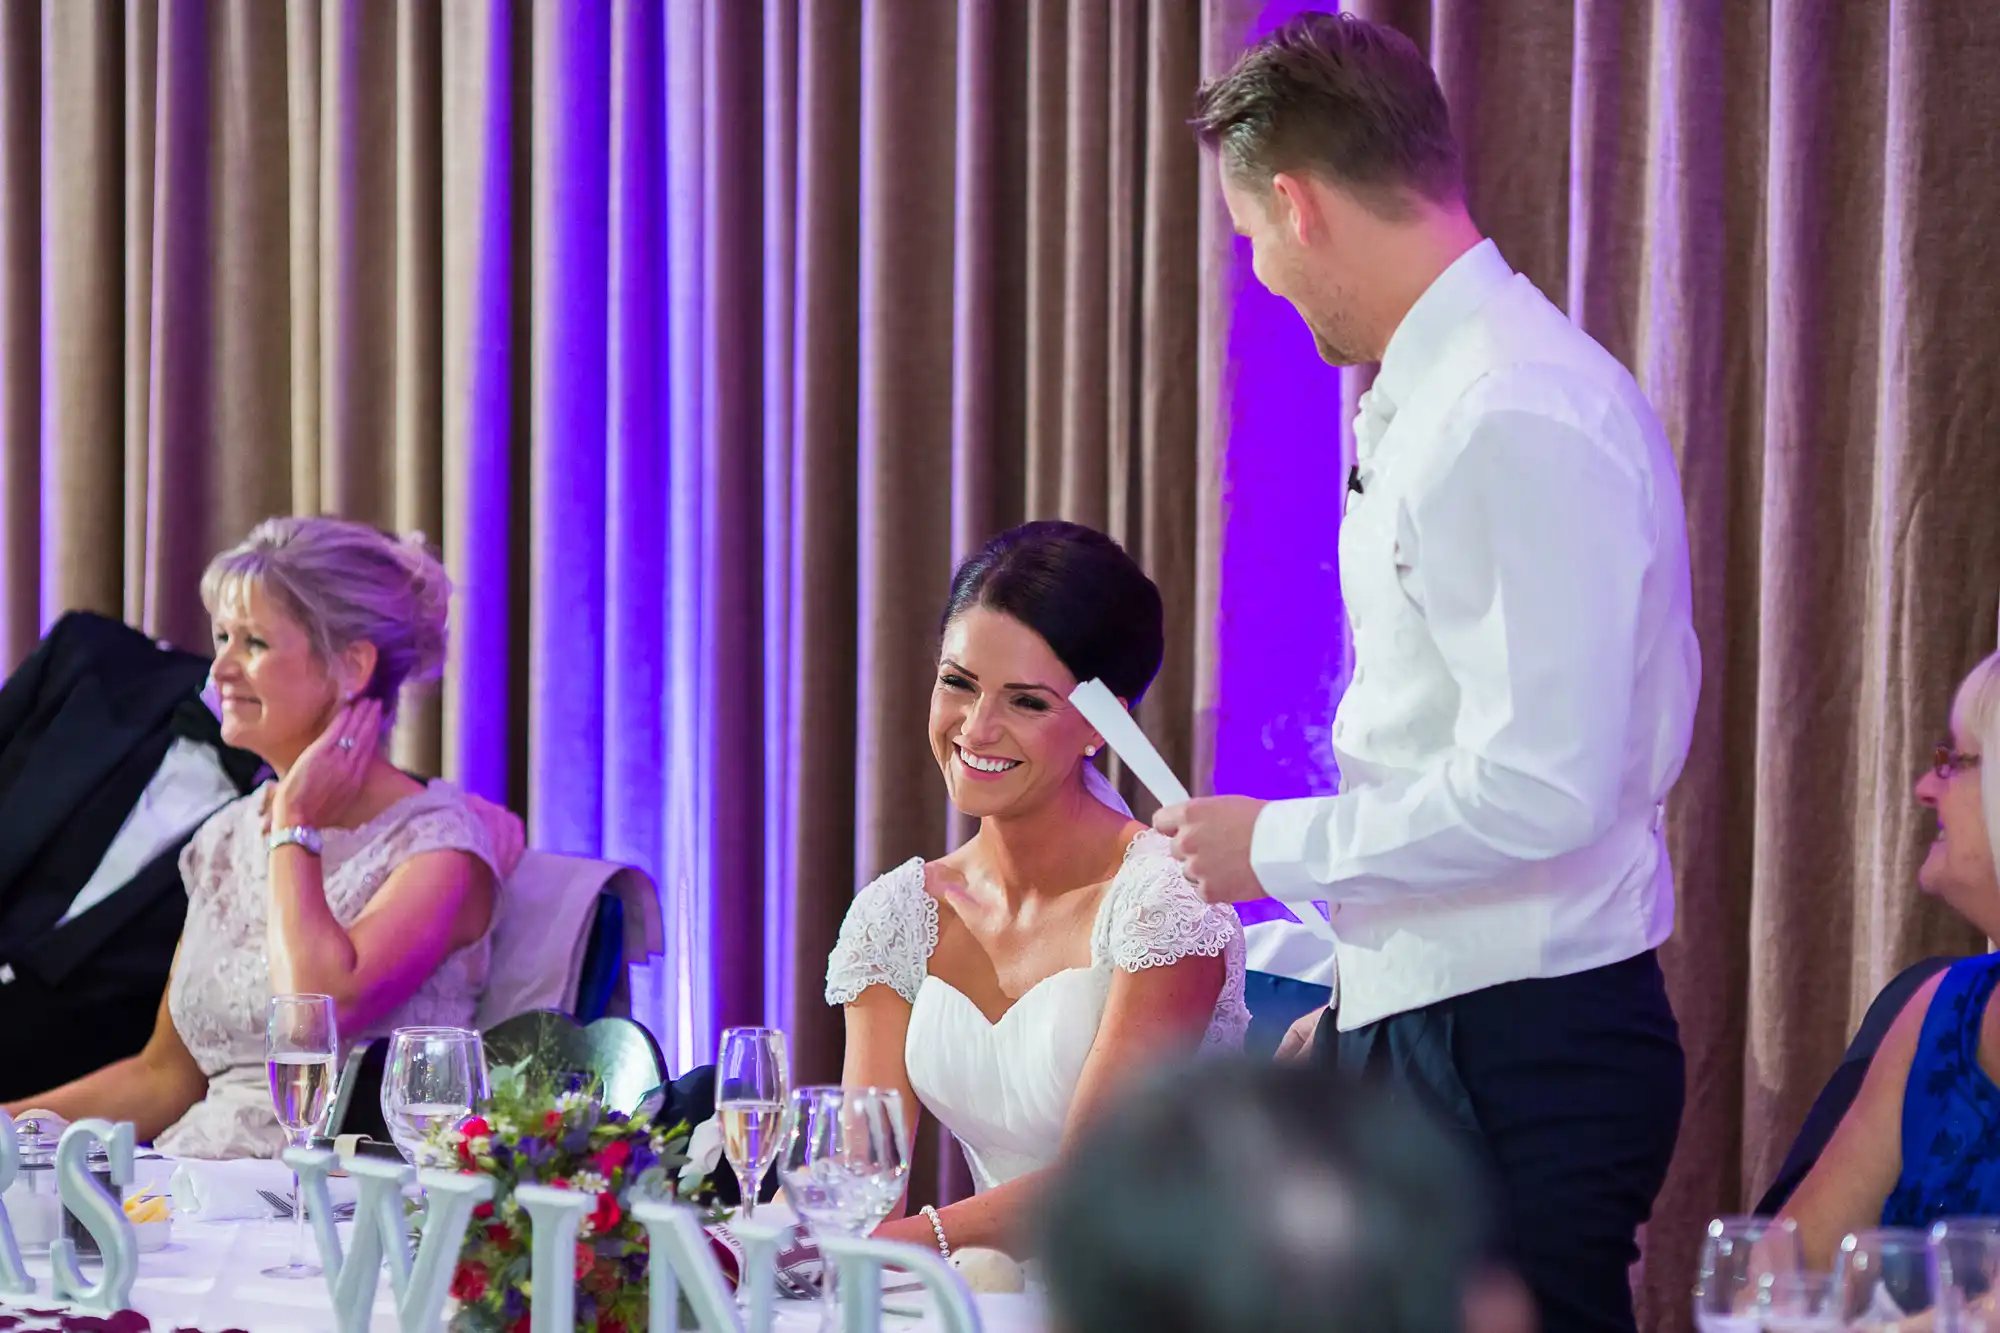 A smiling bride in a white dress seated at a wedding reception table, with a man standing beside her pointing playfully at her cheek.